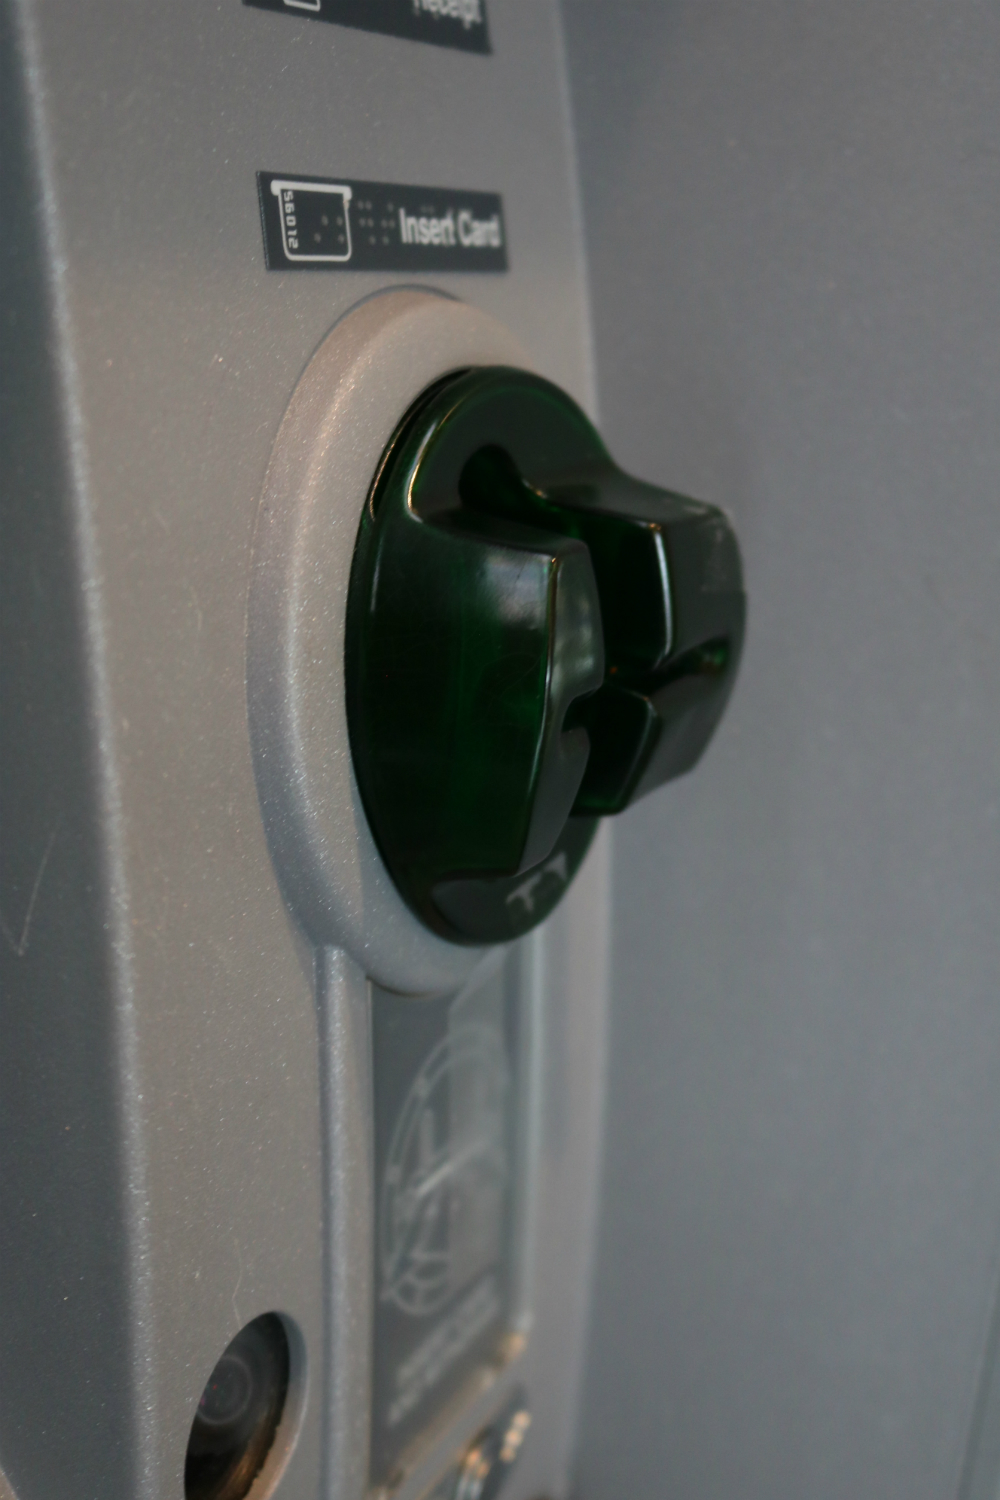 ATM card reader with a skimmer